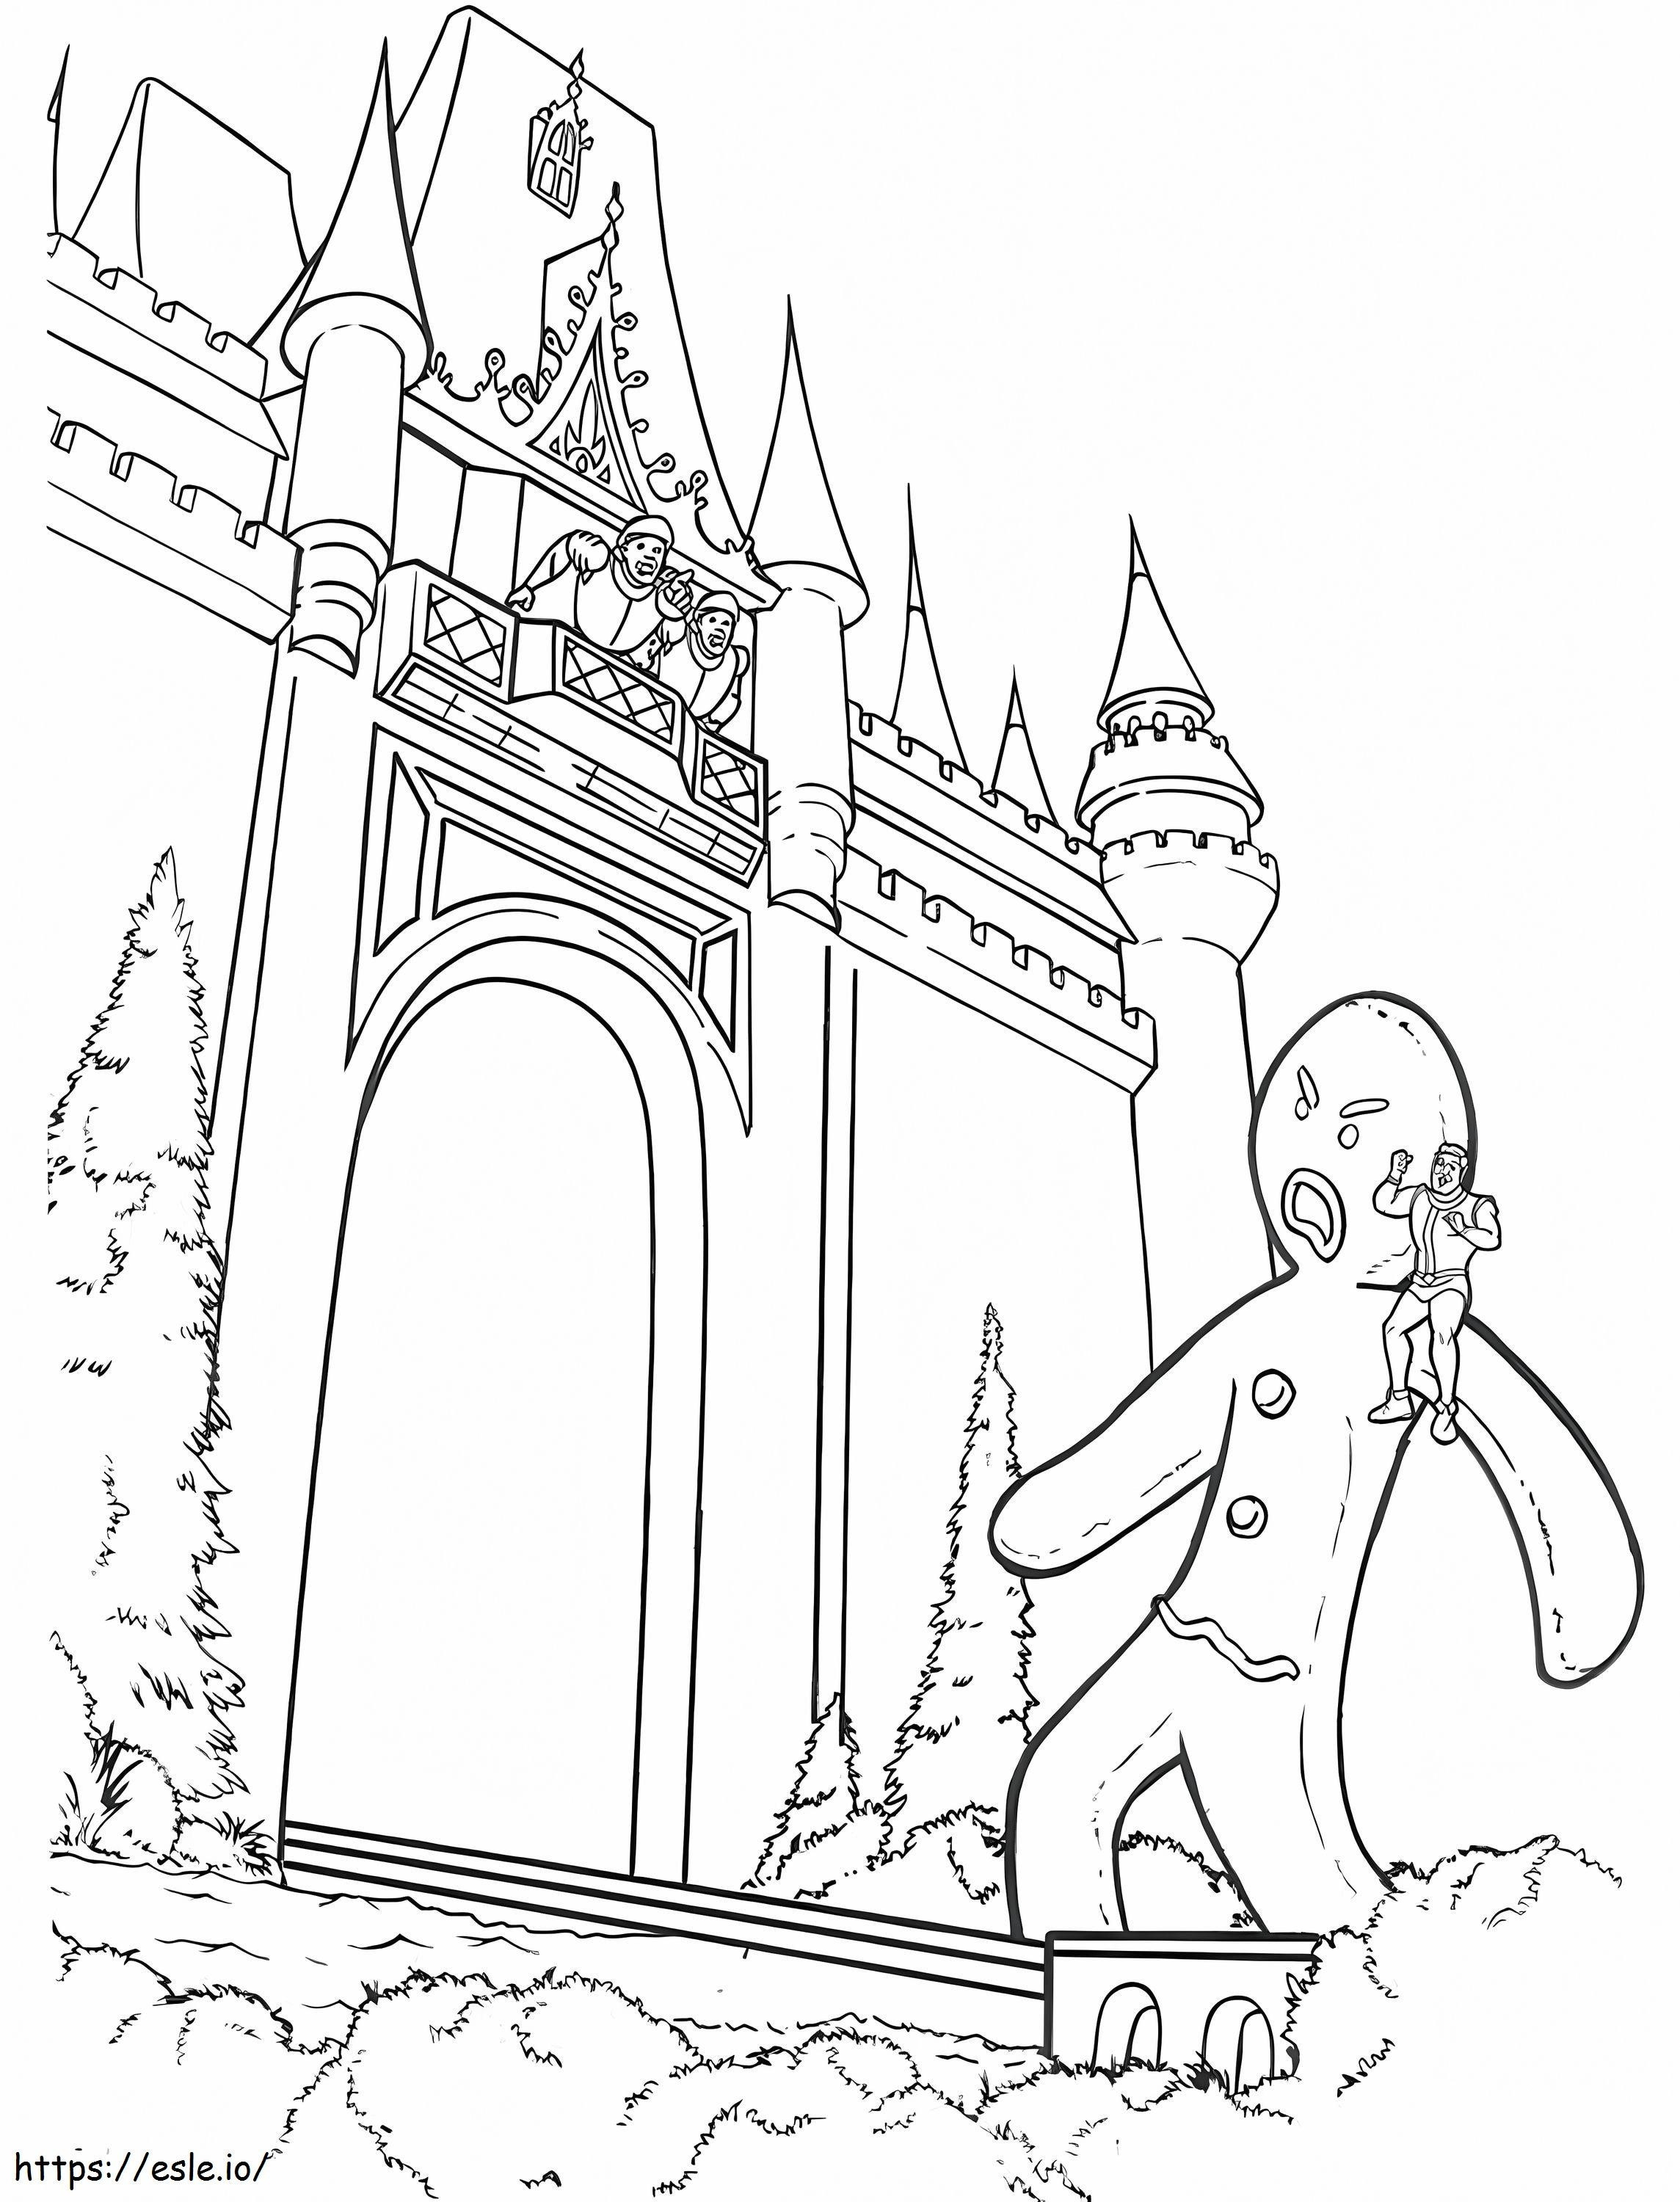 1569244560 Gingerbread Man With Shrek A4 coloring page